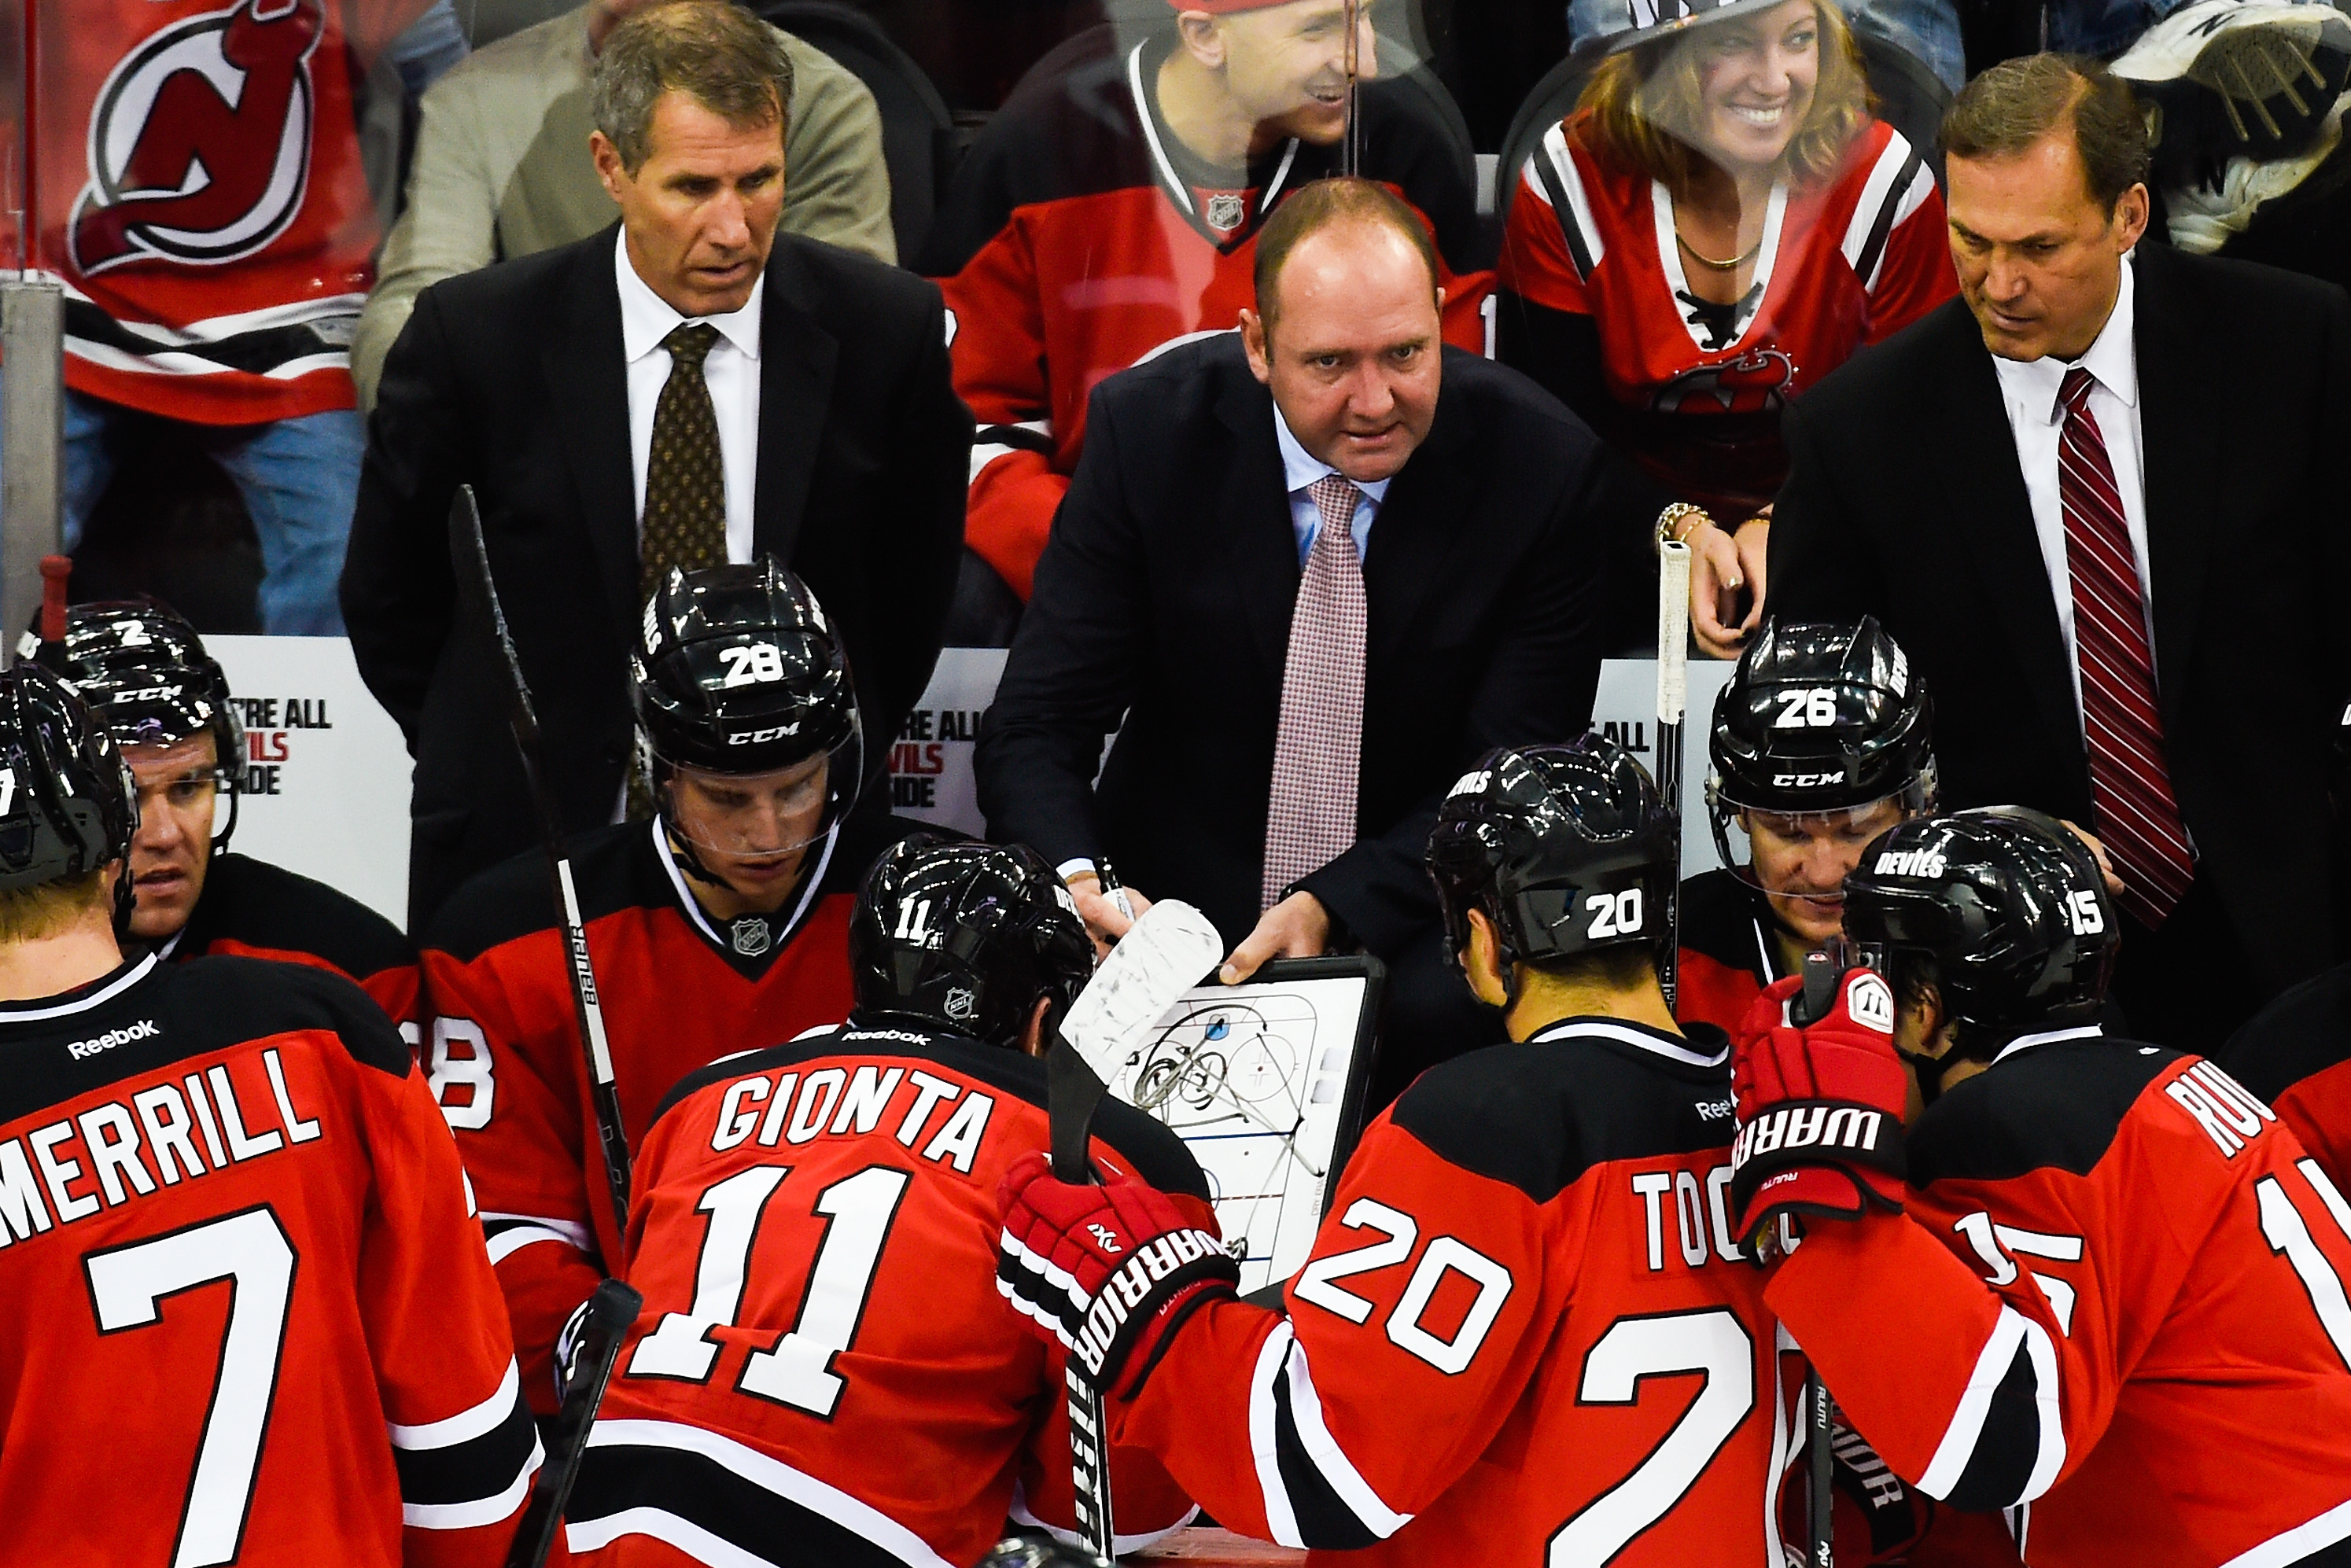 Why Jon Merrill Remained with New Jersey Devils Over Eric Gelinas